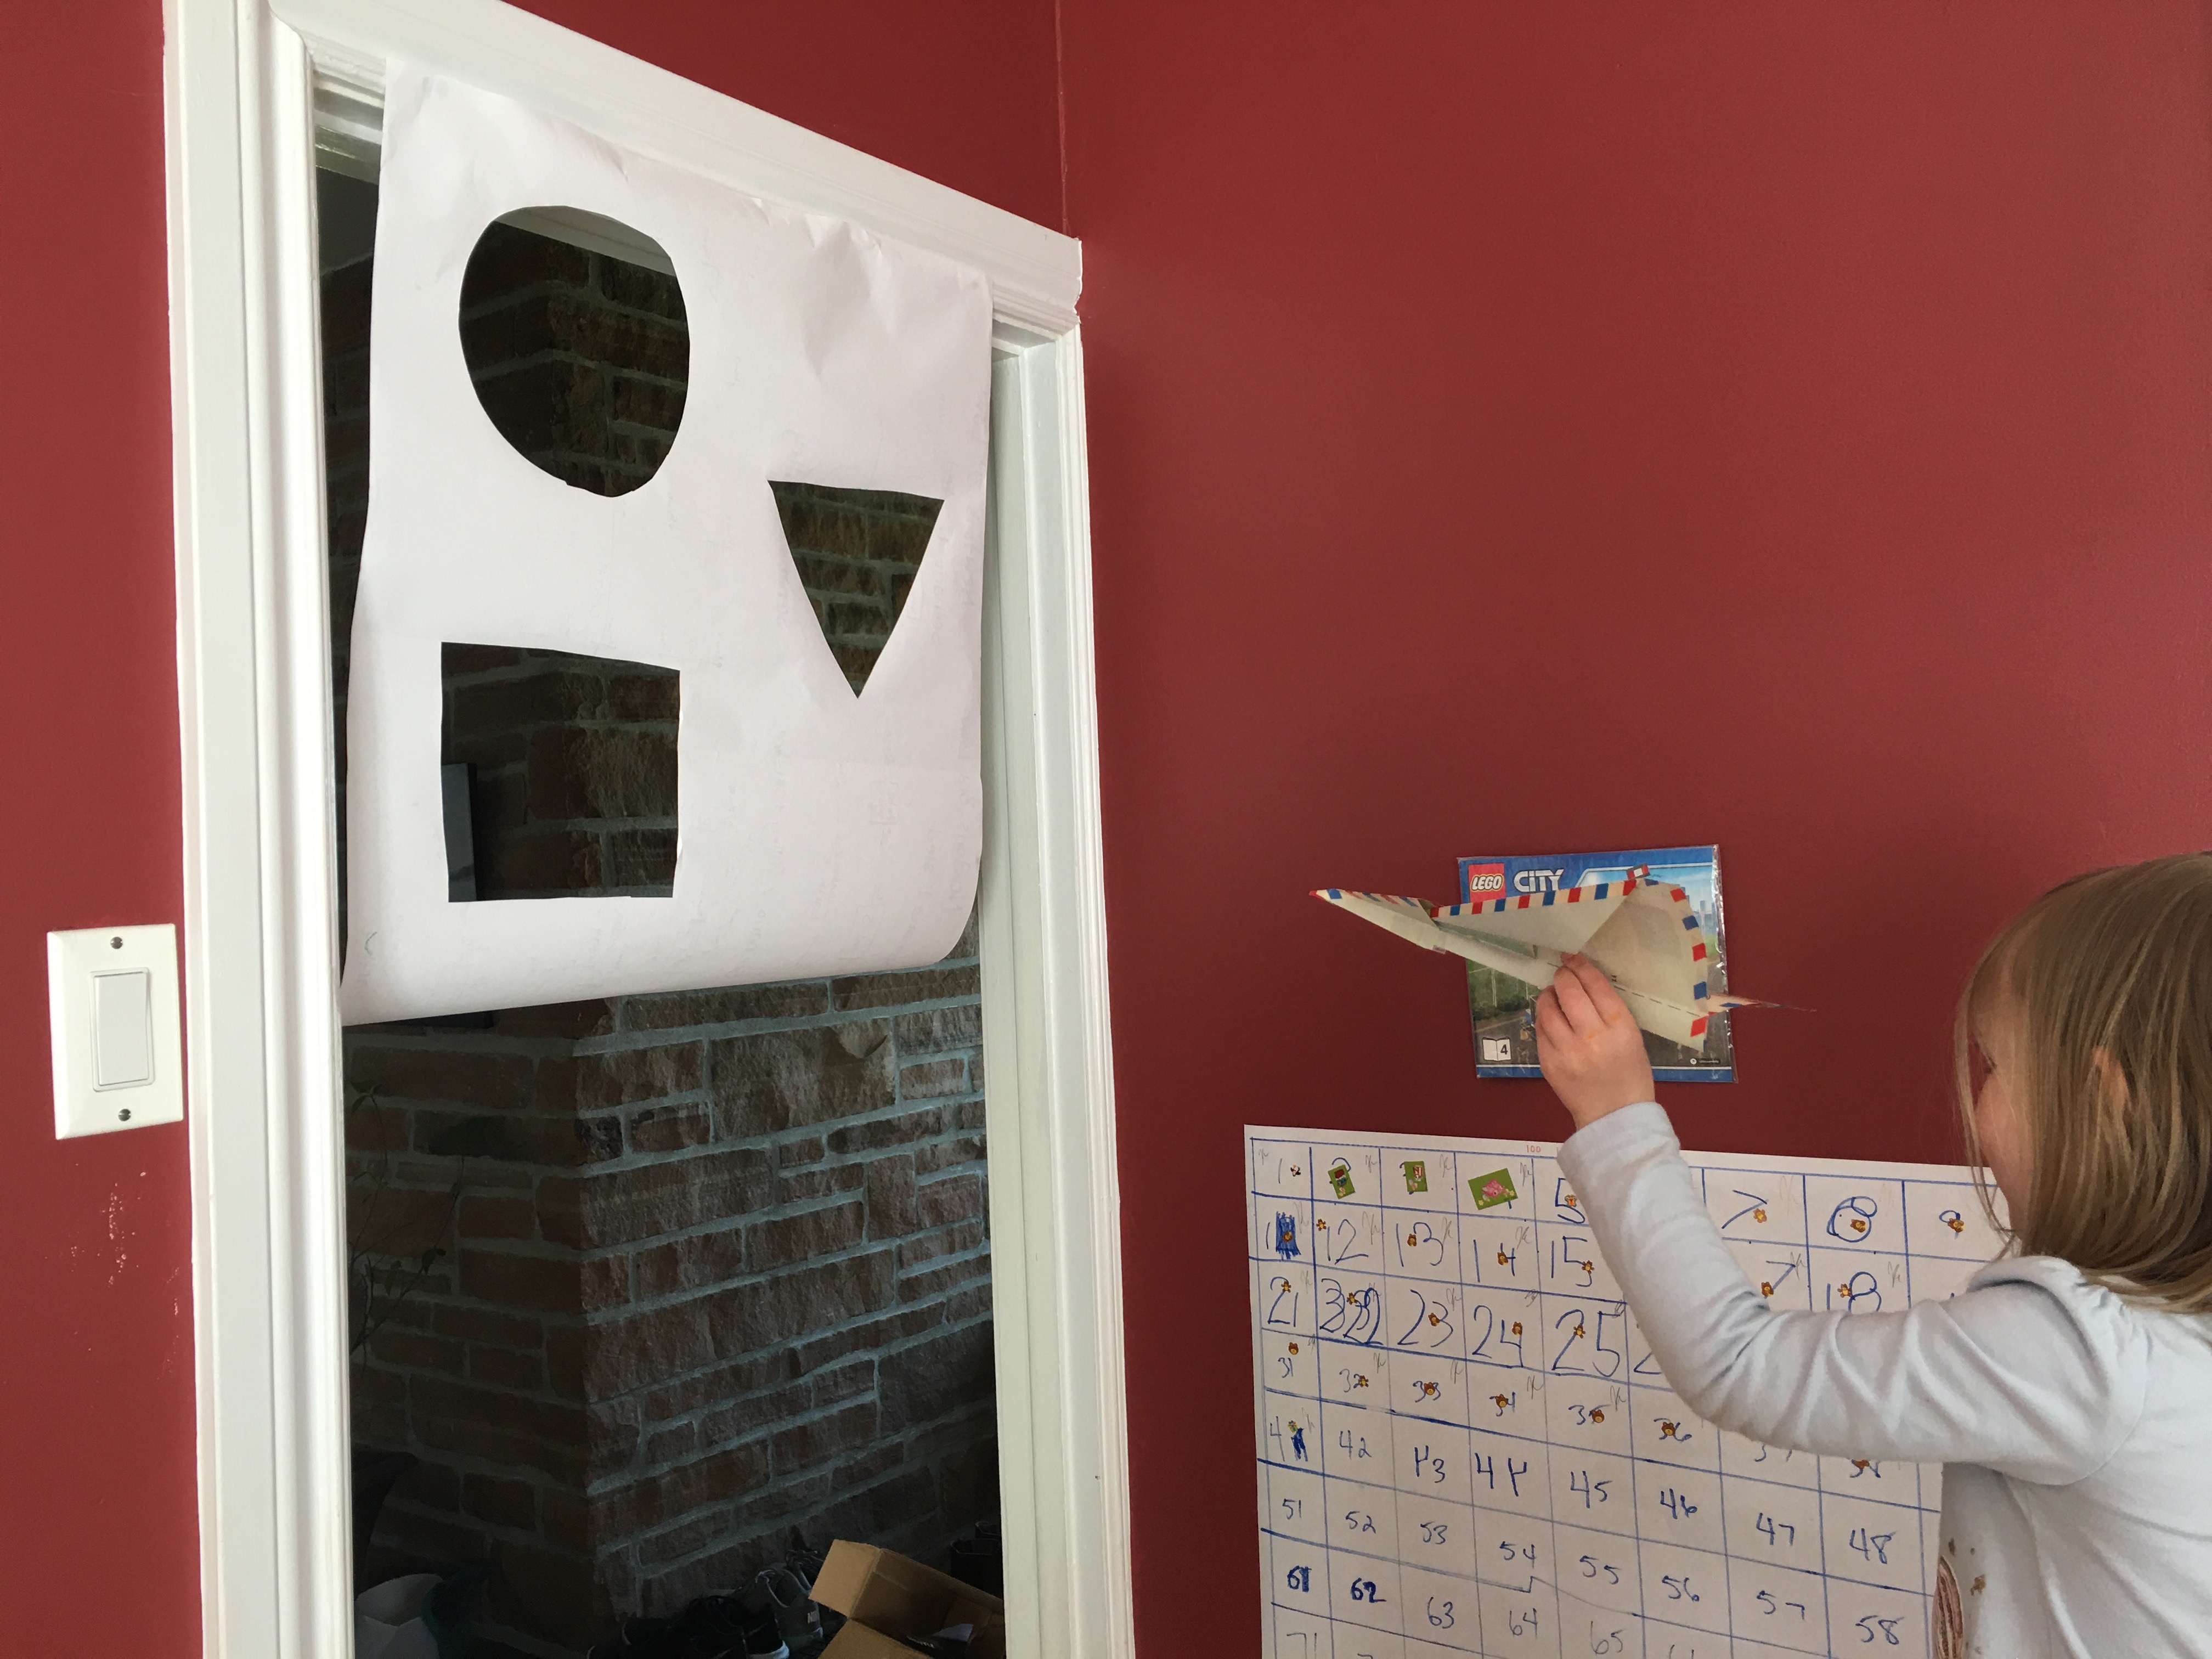 A little girl is seen holding a paper airplane ready to throw it towards a large white paper hanging from a doorframe, with a circle, triangle, and rectangle cut out as targets